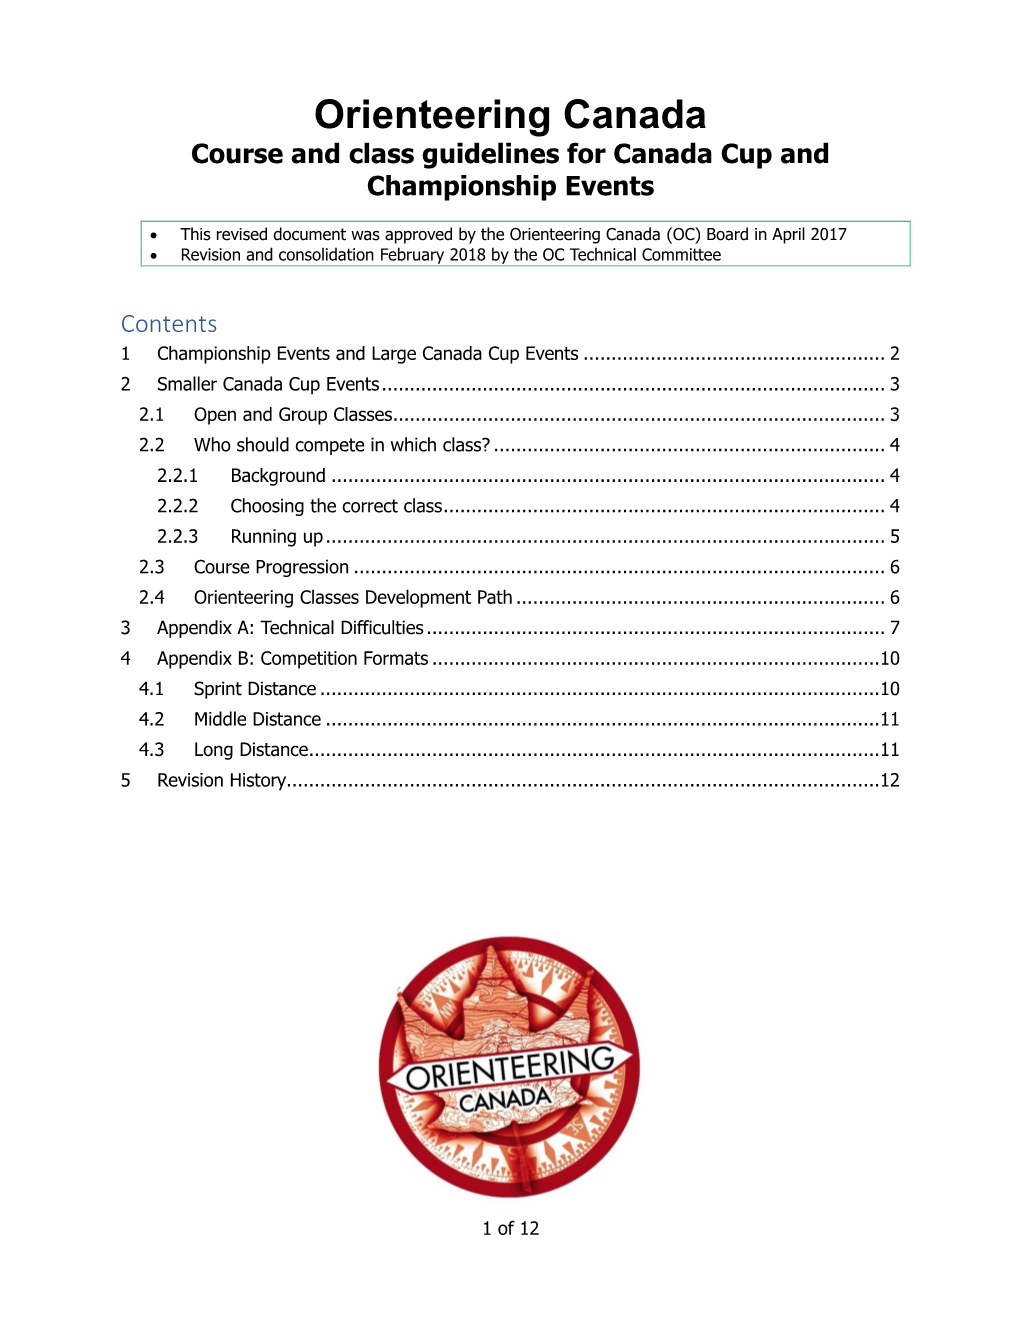 Orienteering Canada Course and Class Guidelines for Canada Cup and Championship Events